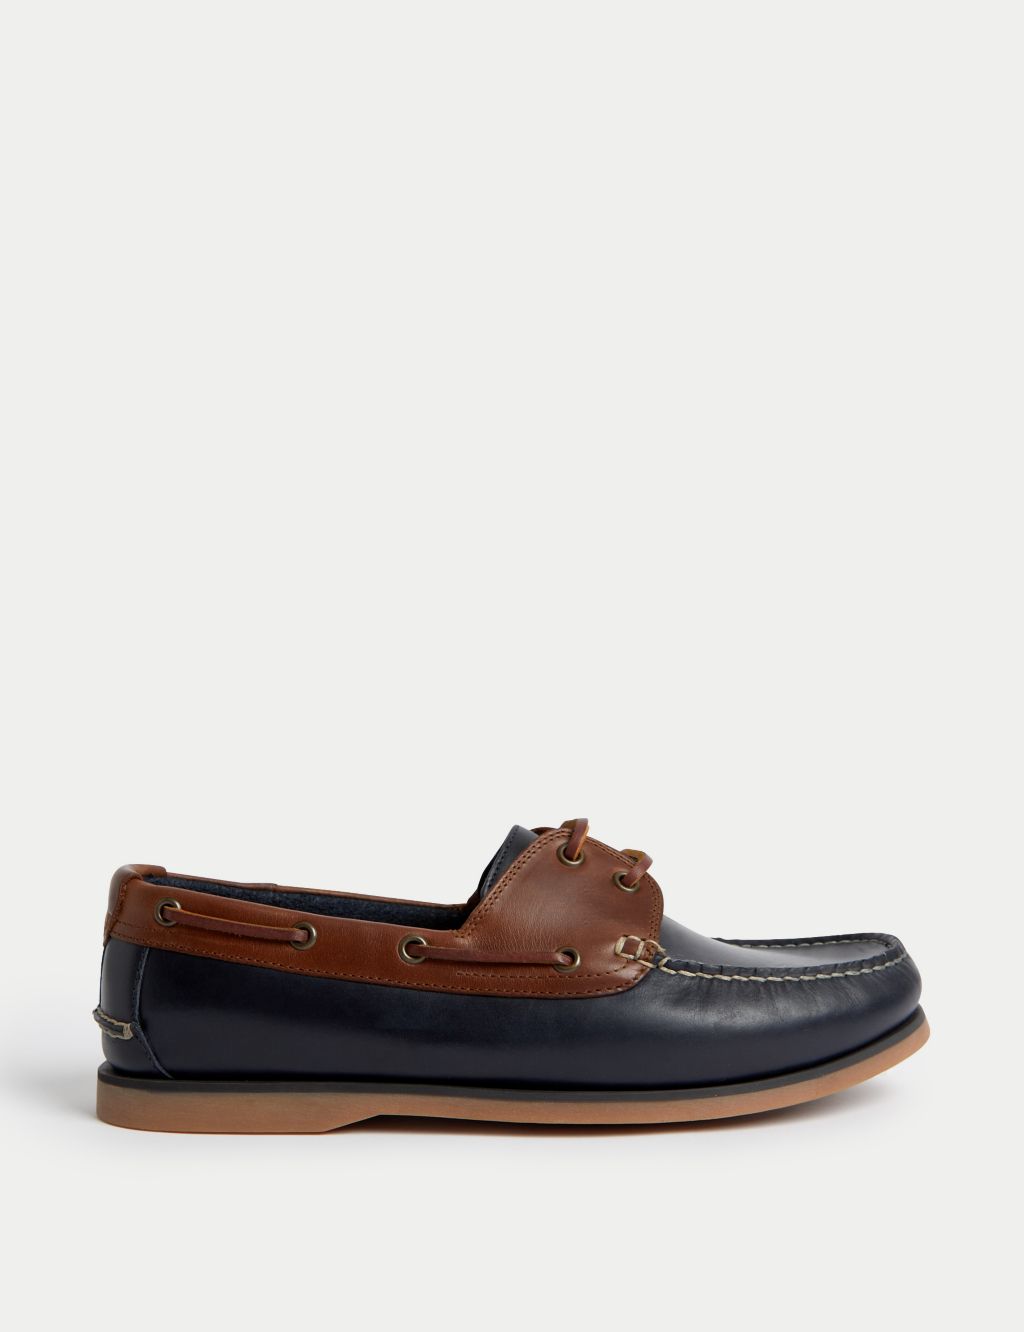 Wide Fit Leather Slip-On Deck Shoes